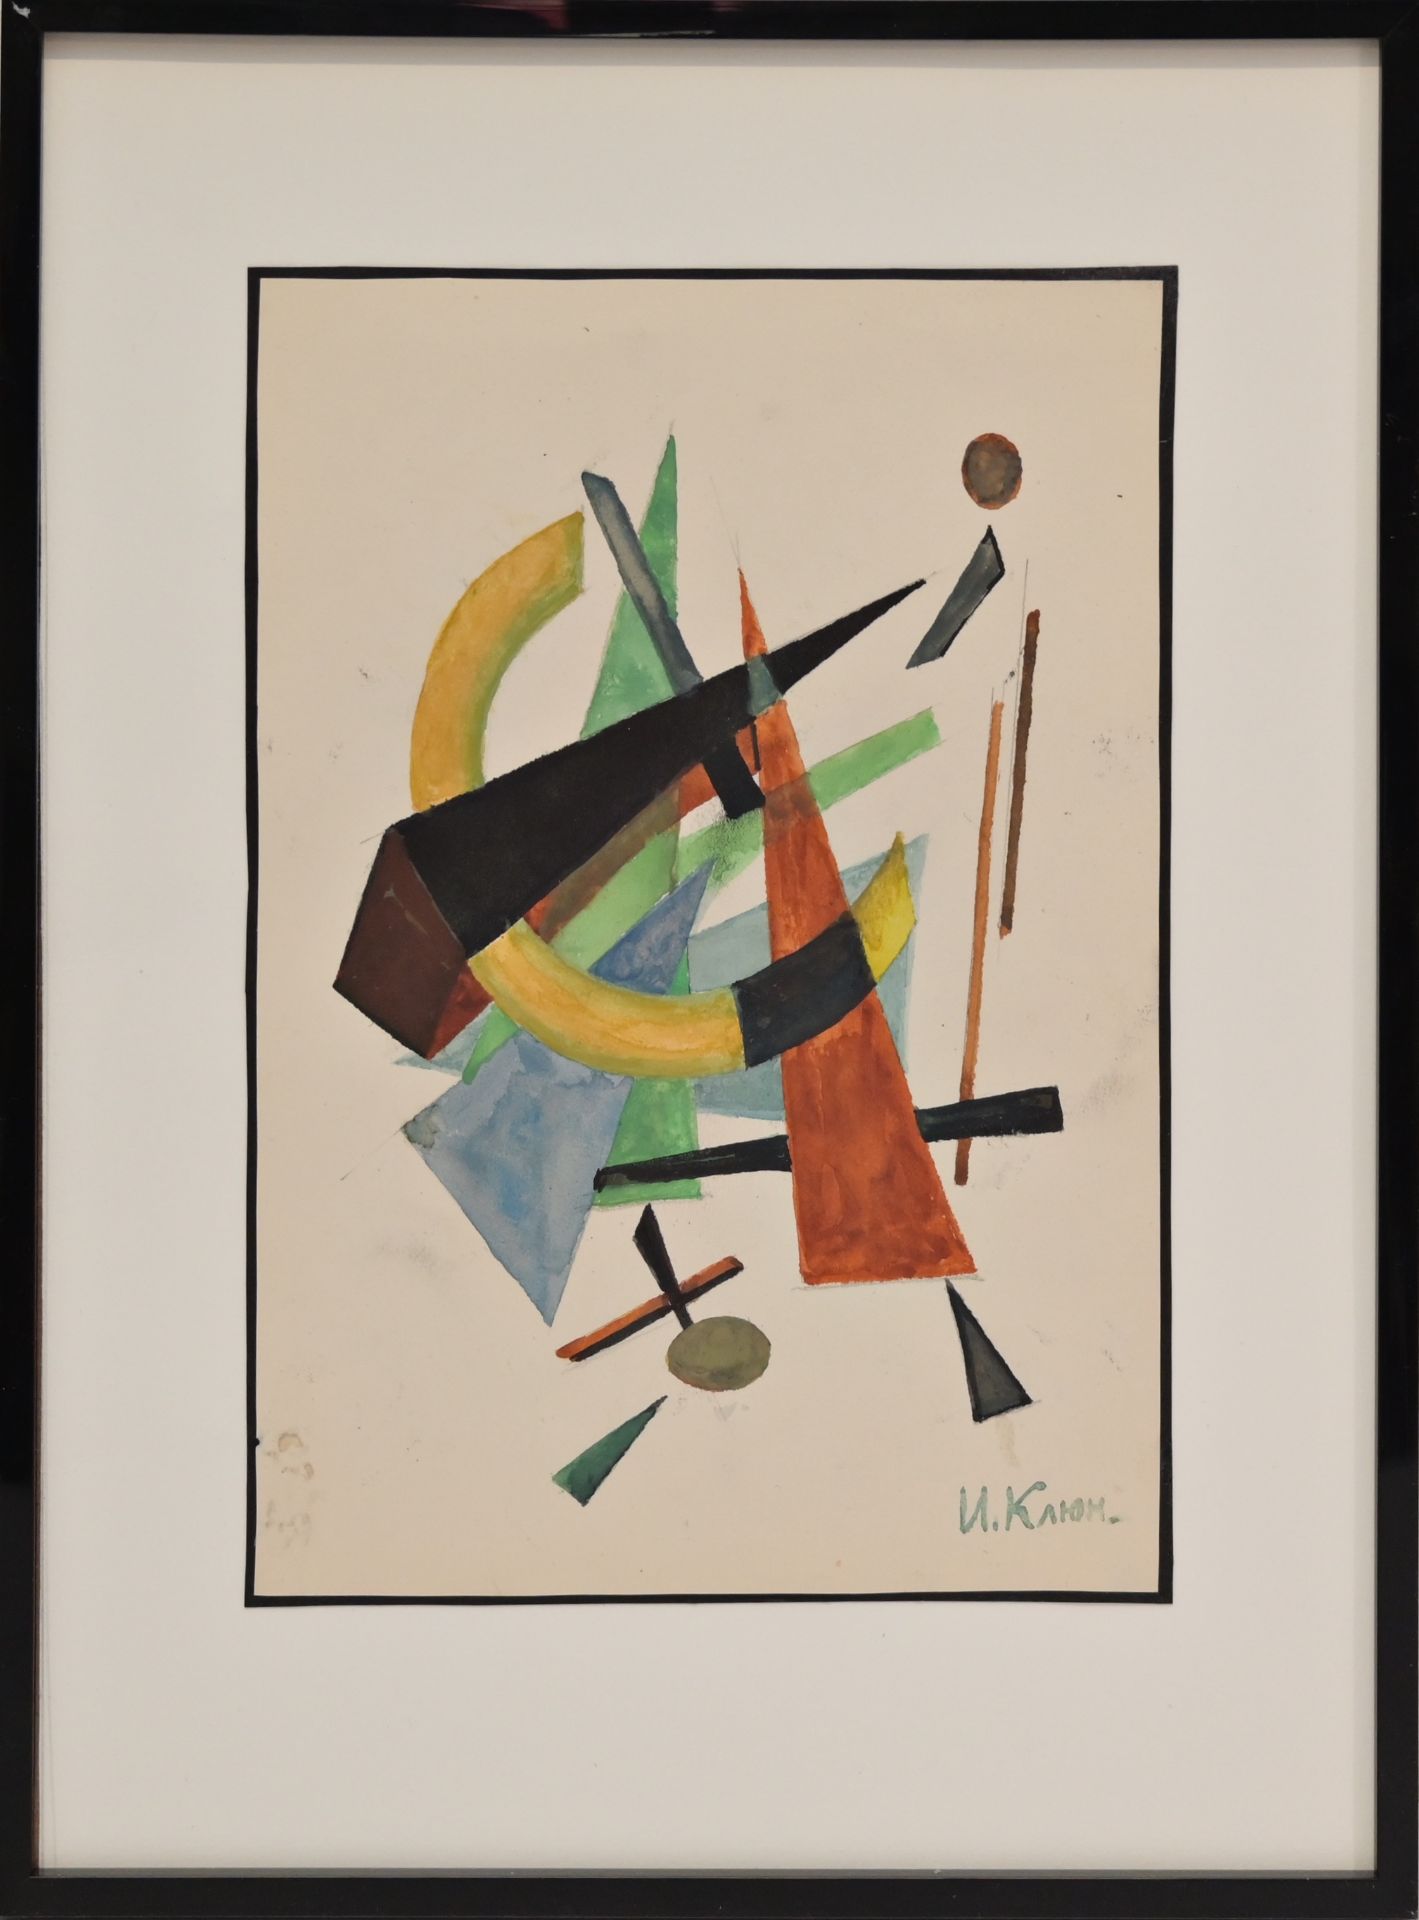 Ivan Vasilievitch KLIUN (1873-1943) "Abstract Composition", watercolor on paper, signed I Kliun. - Image 2 of 4